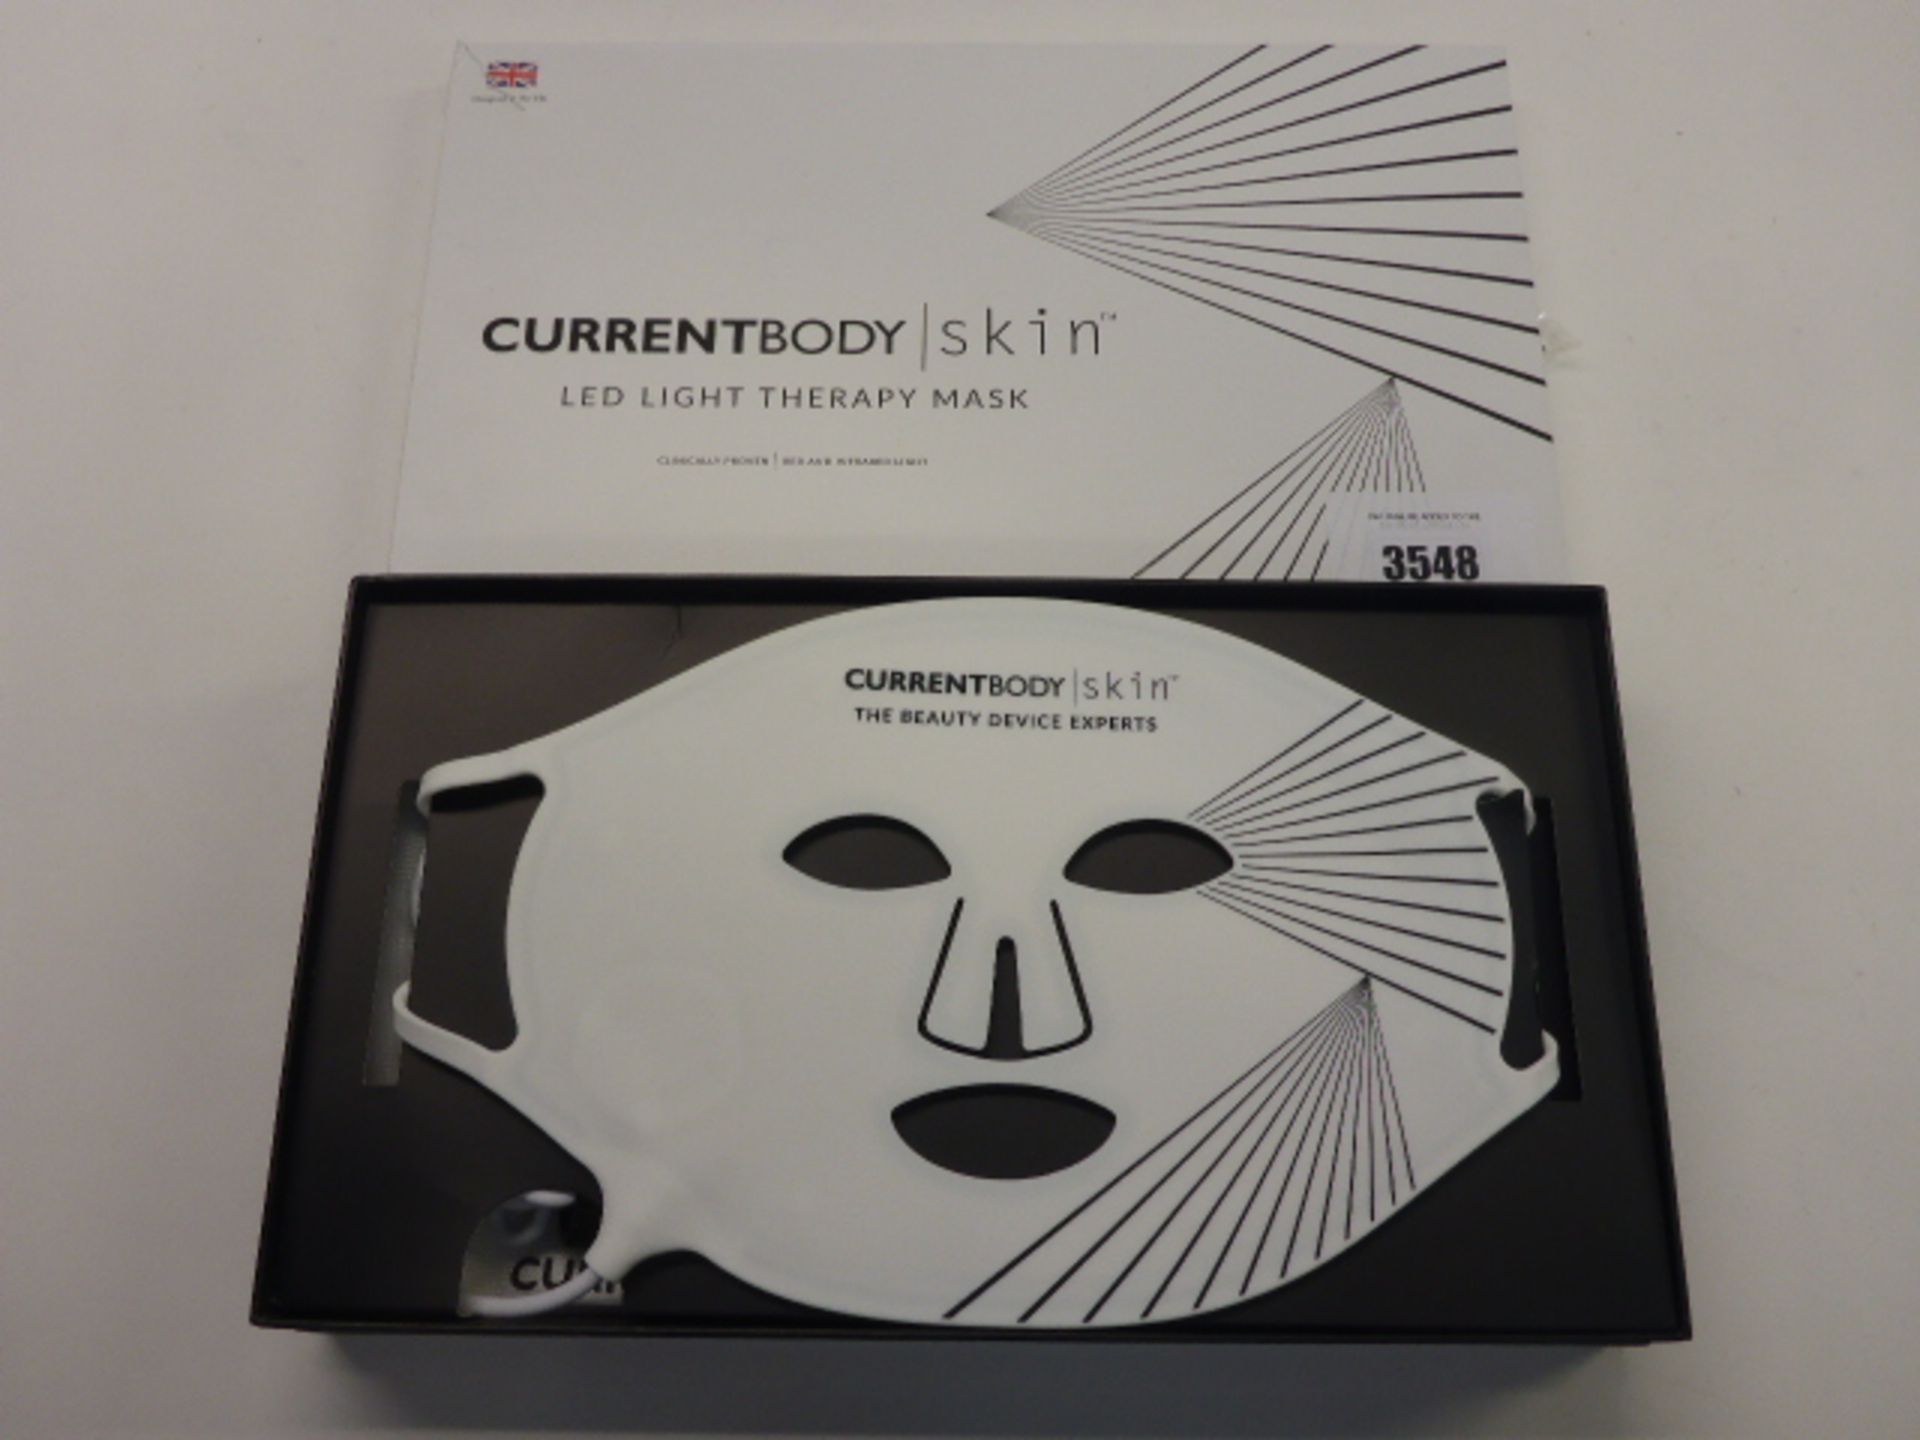 Current Body skin LED light therapy mask